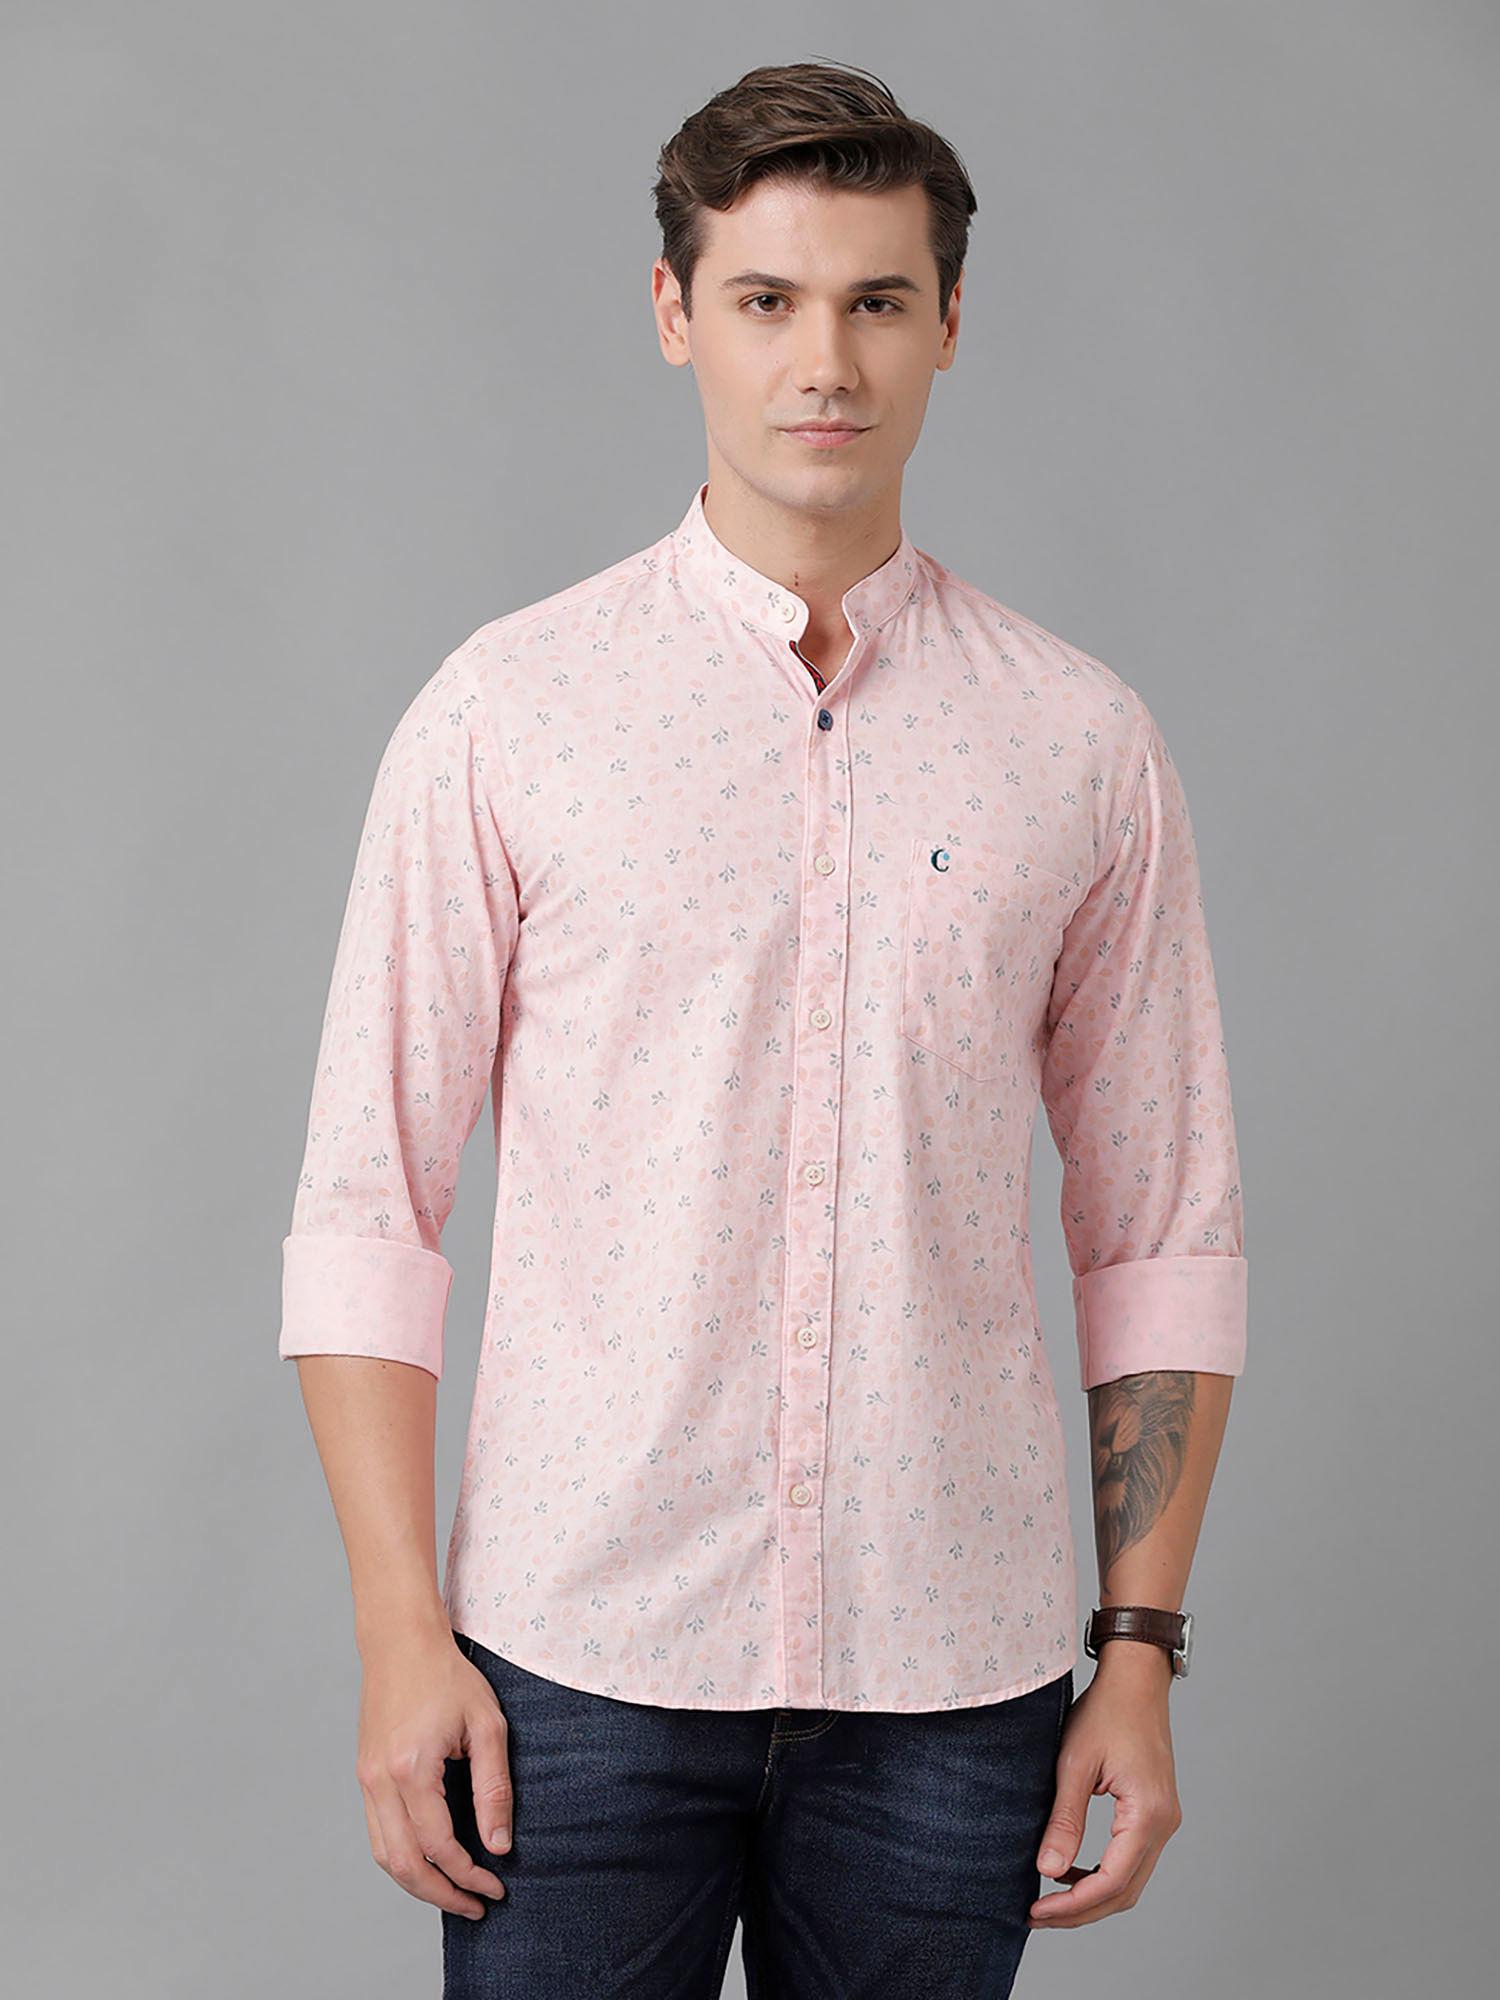 men's cotton linen pink printed slim fit full sleeve casual shirt